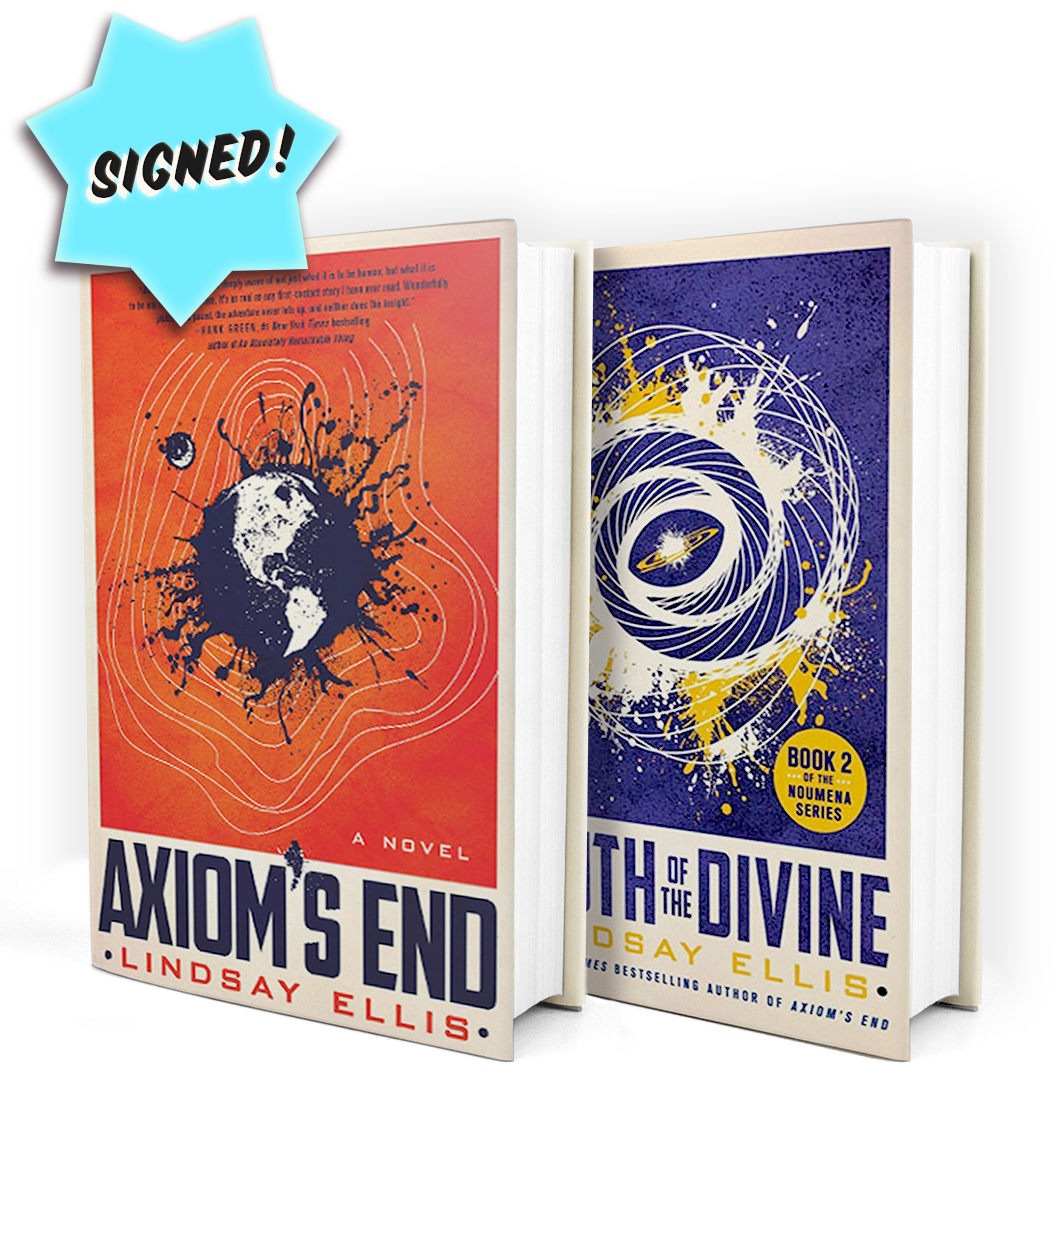 Axiom's End and Truth of the Divine books by Lindsay Ellis that are both signed by the author! Astronomical artwork on both covers.